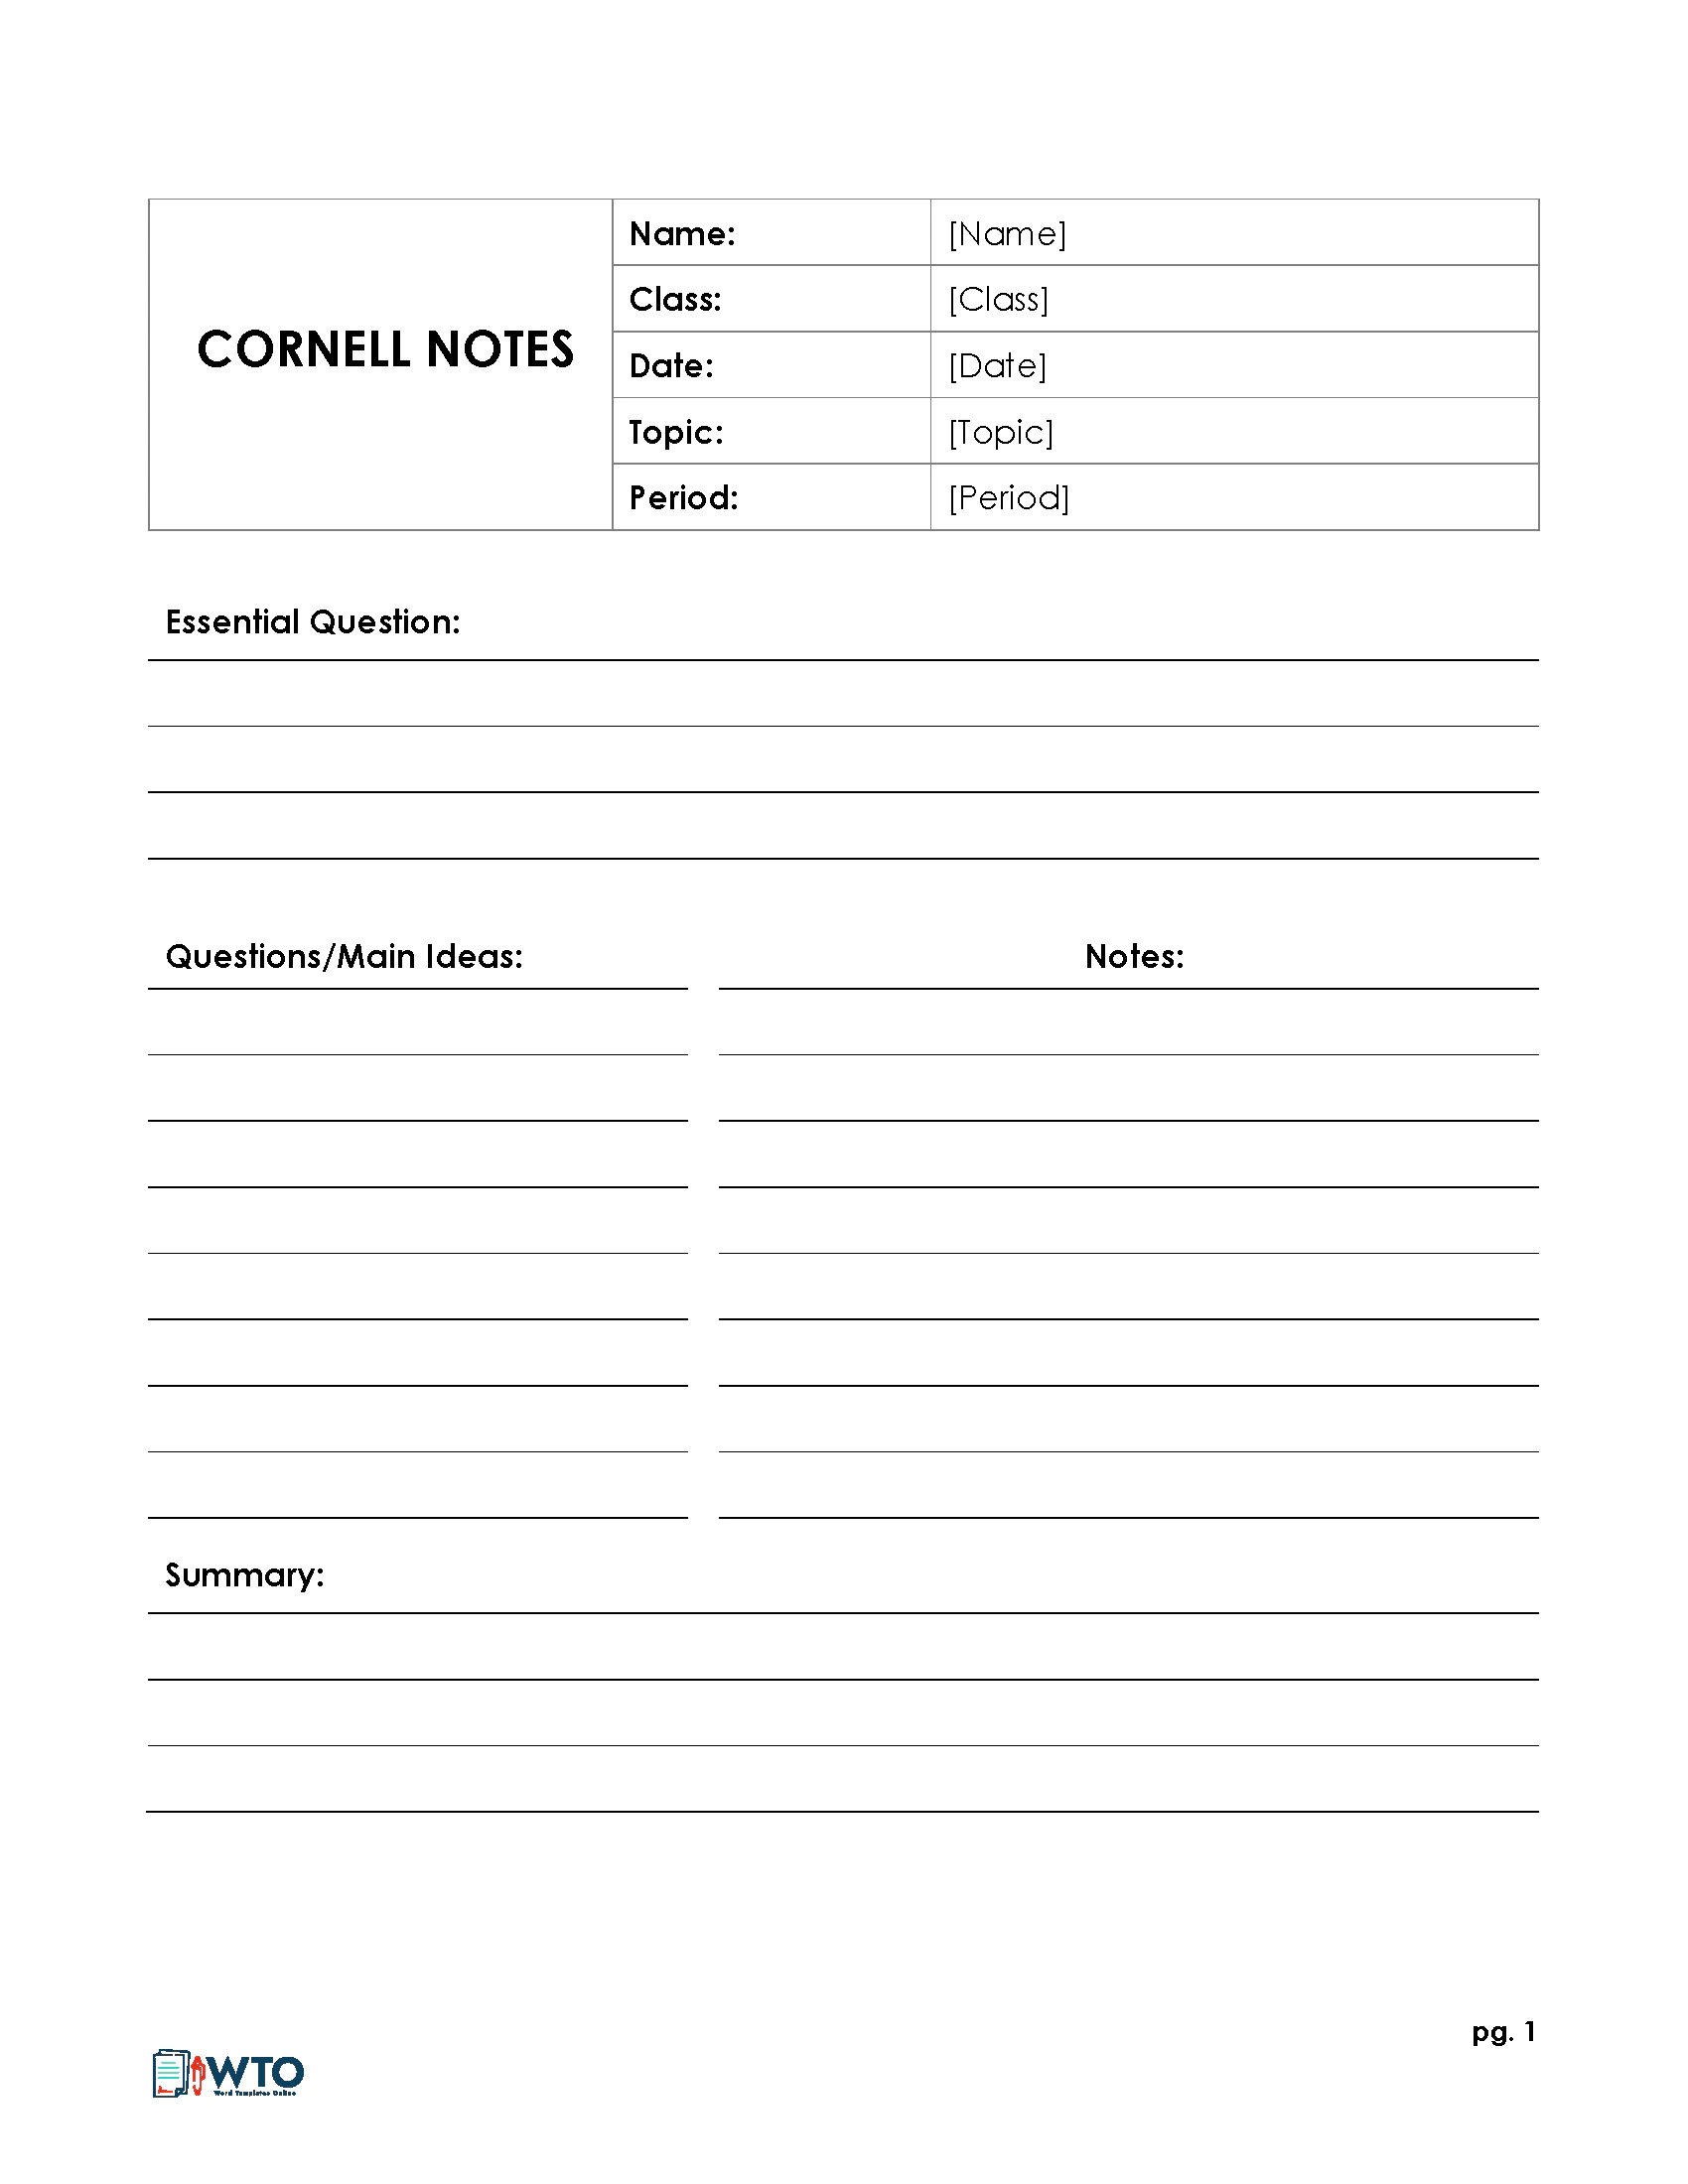 23 Free Cornell Note Templates (Cornell Note Taking Explained) In Avid Cornell Note Template